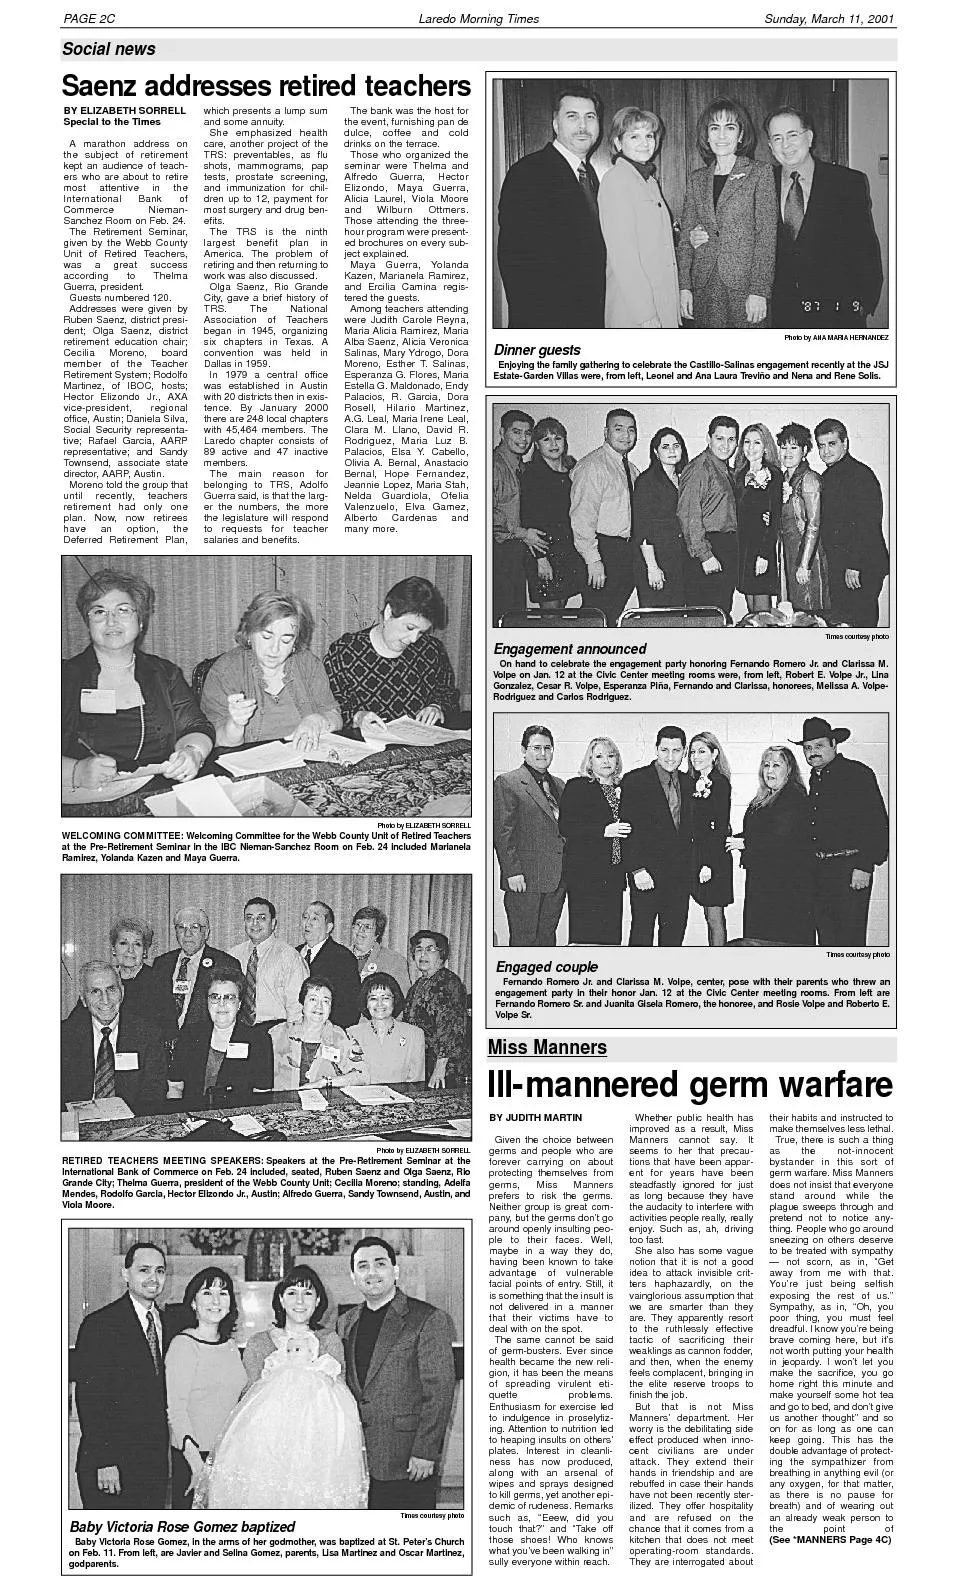 PAGE 2CLaredo Morning TimesSunday, March 11, 2001